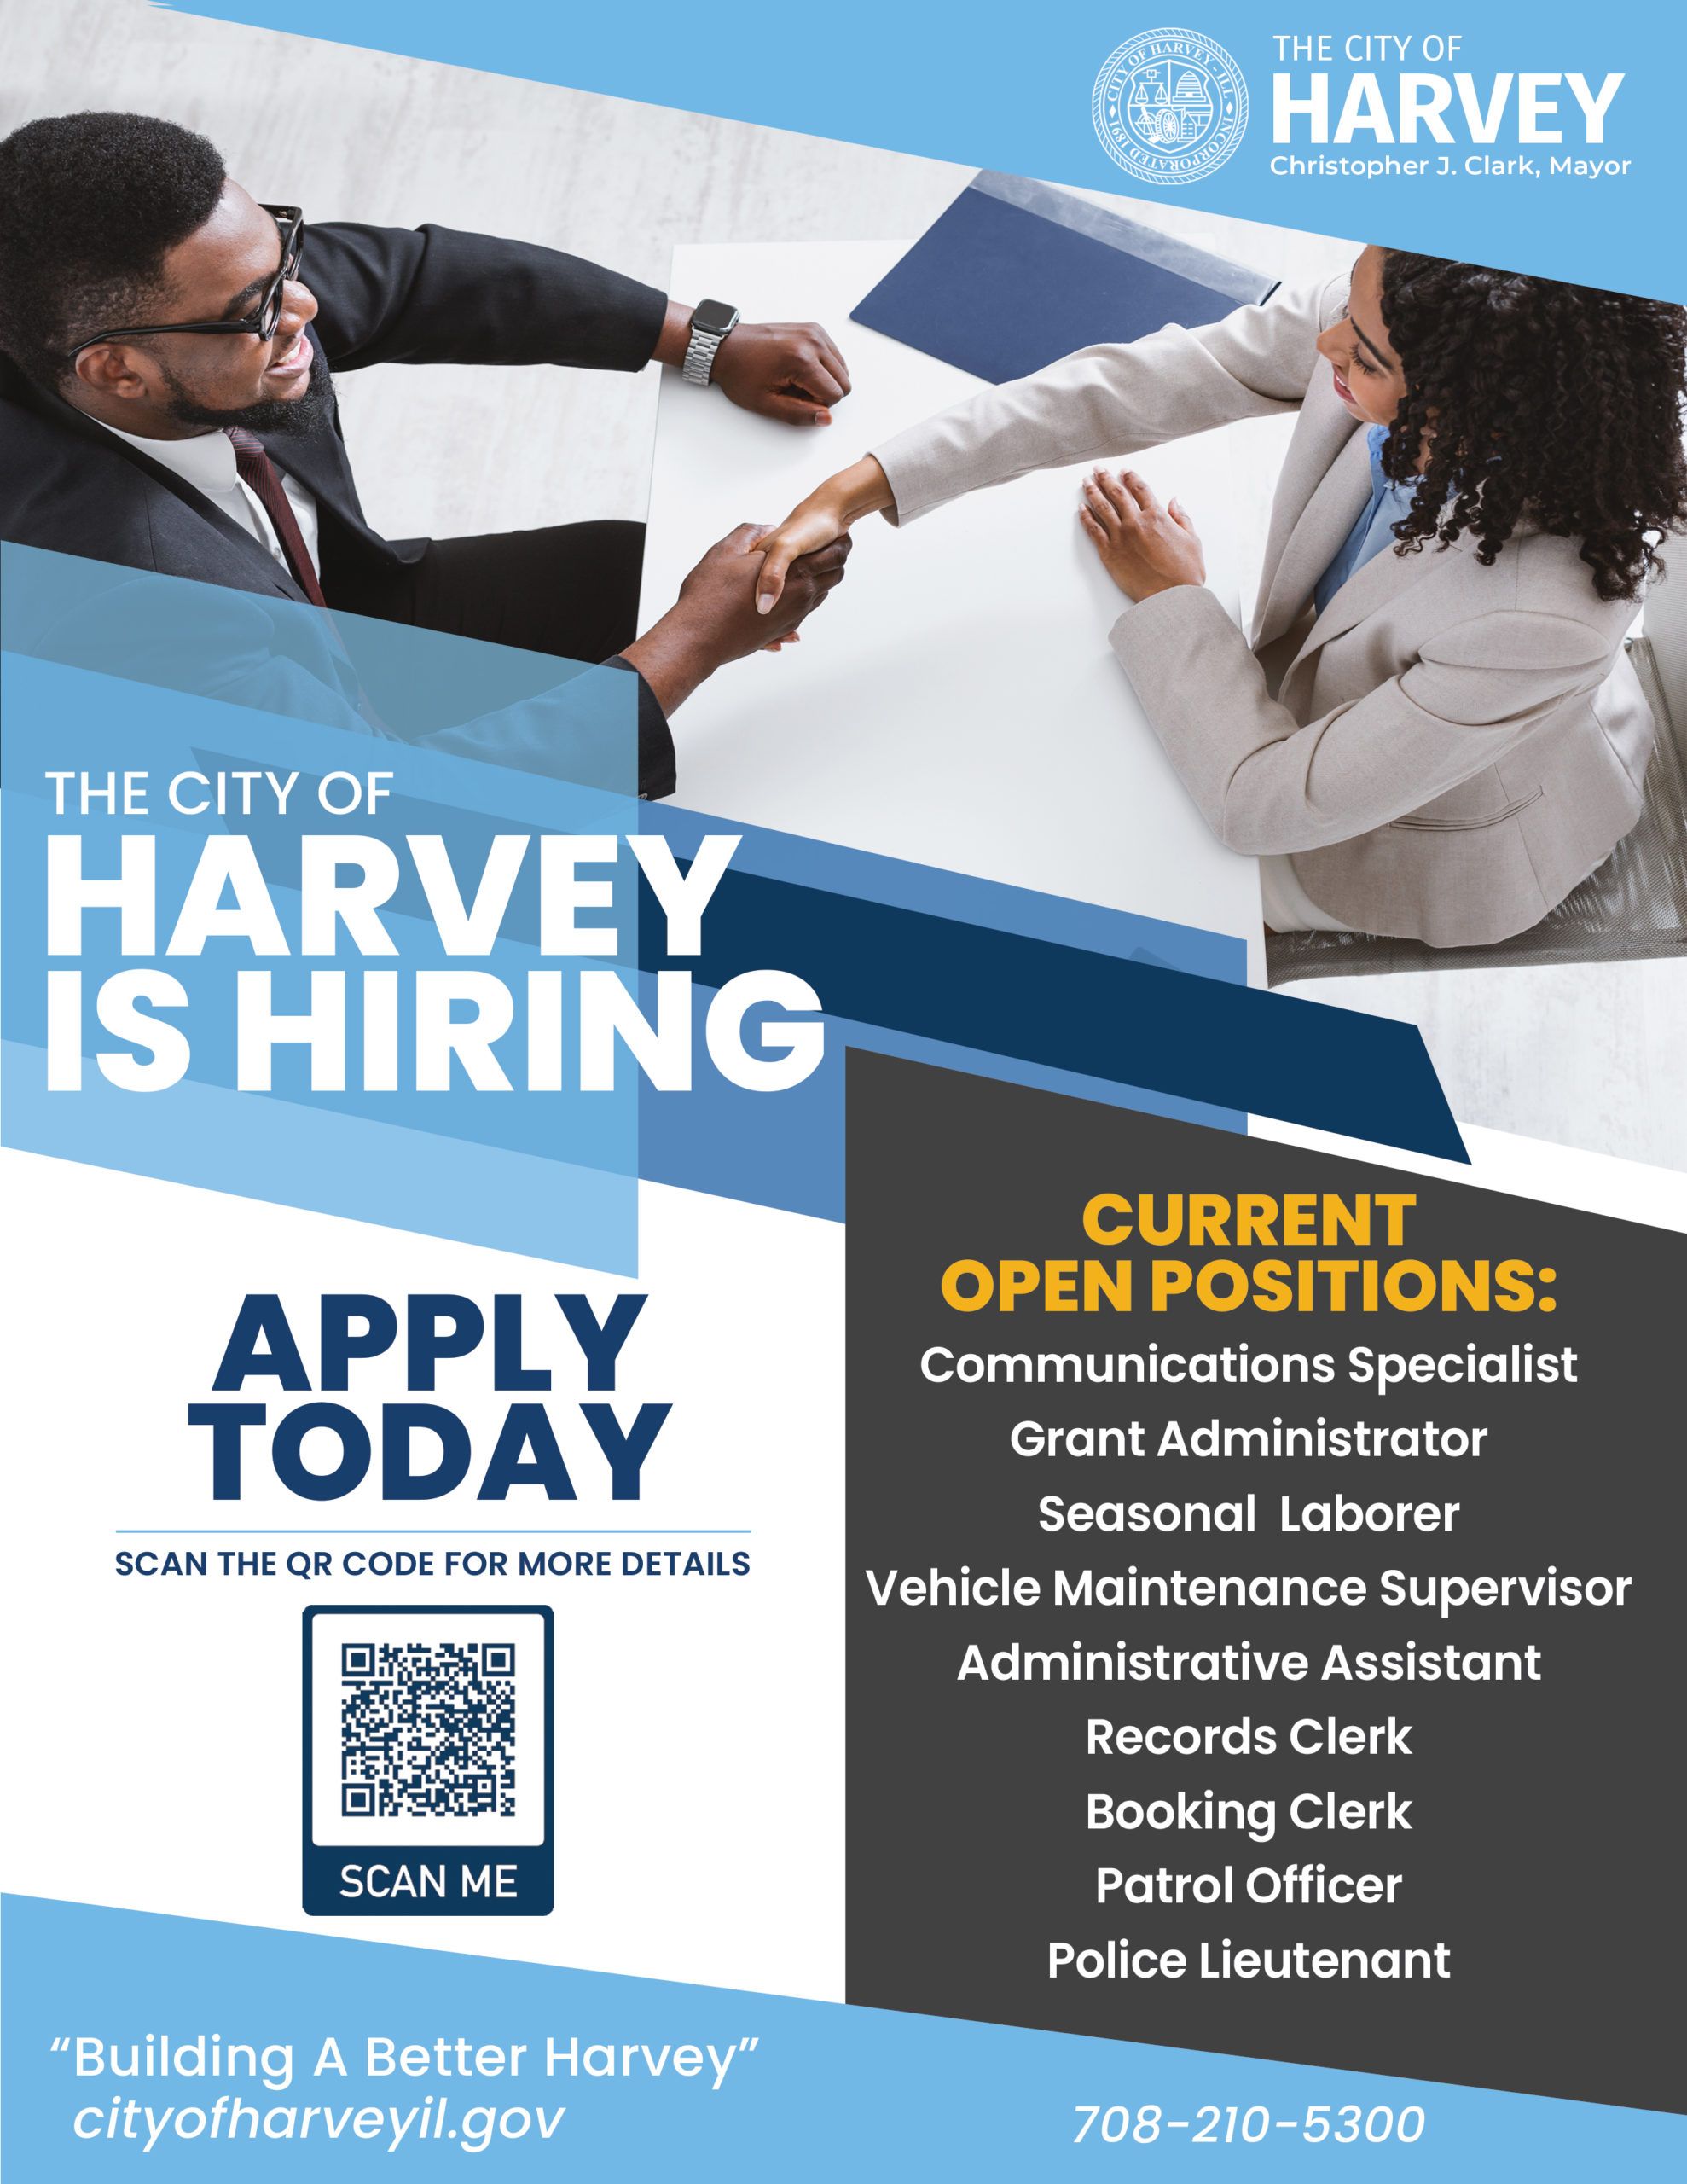 The City of Harvey is Hiring